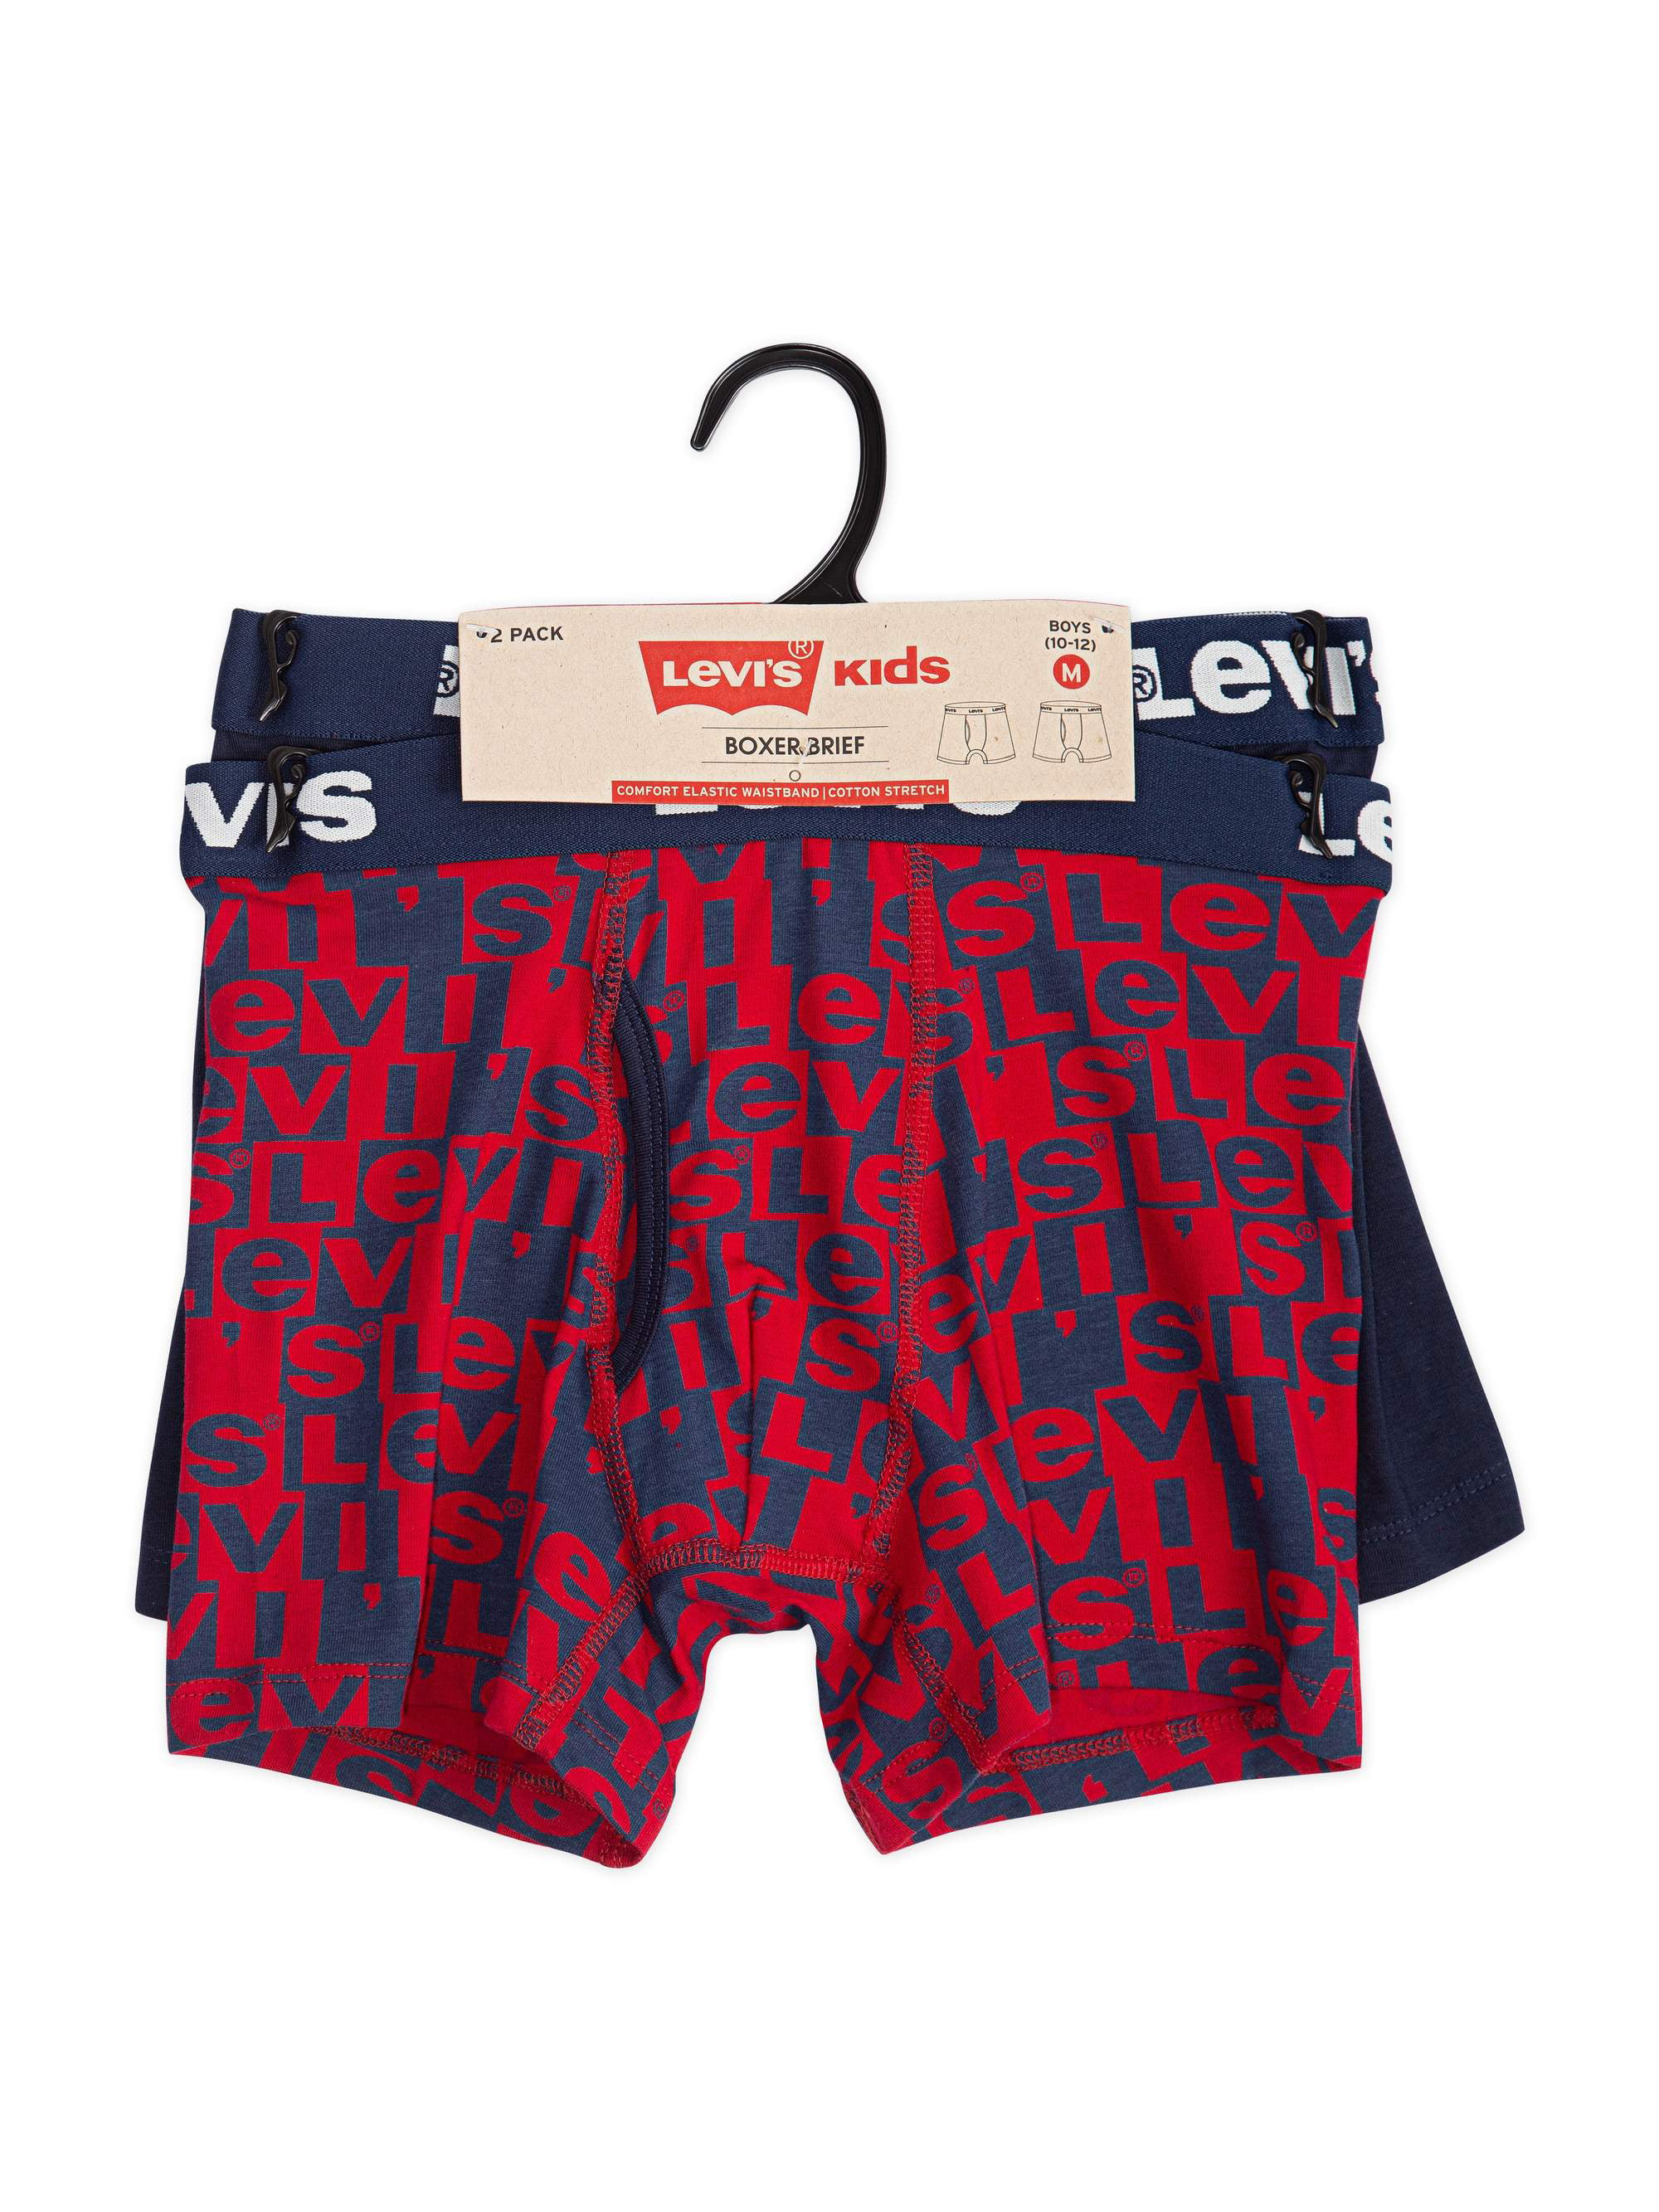 levi boxers size guide